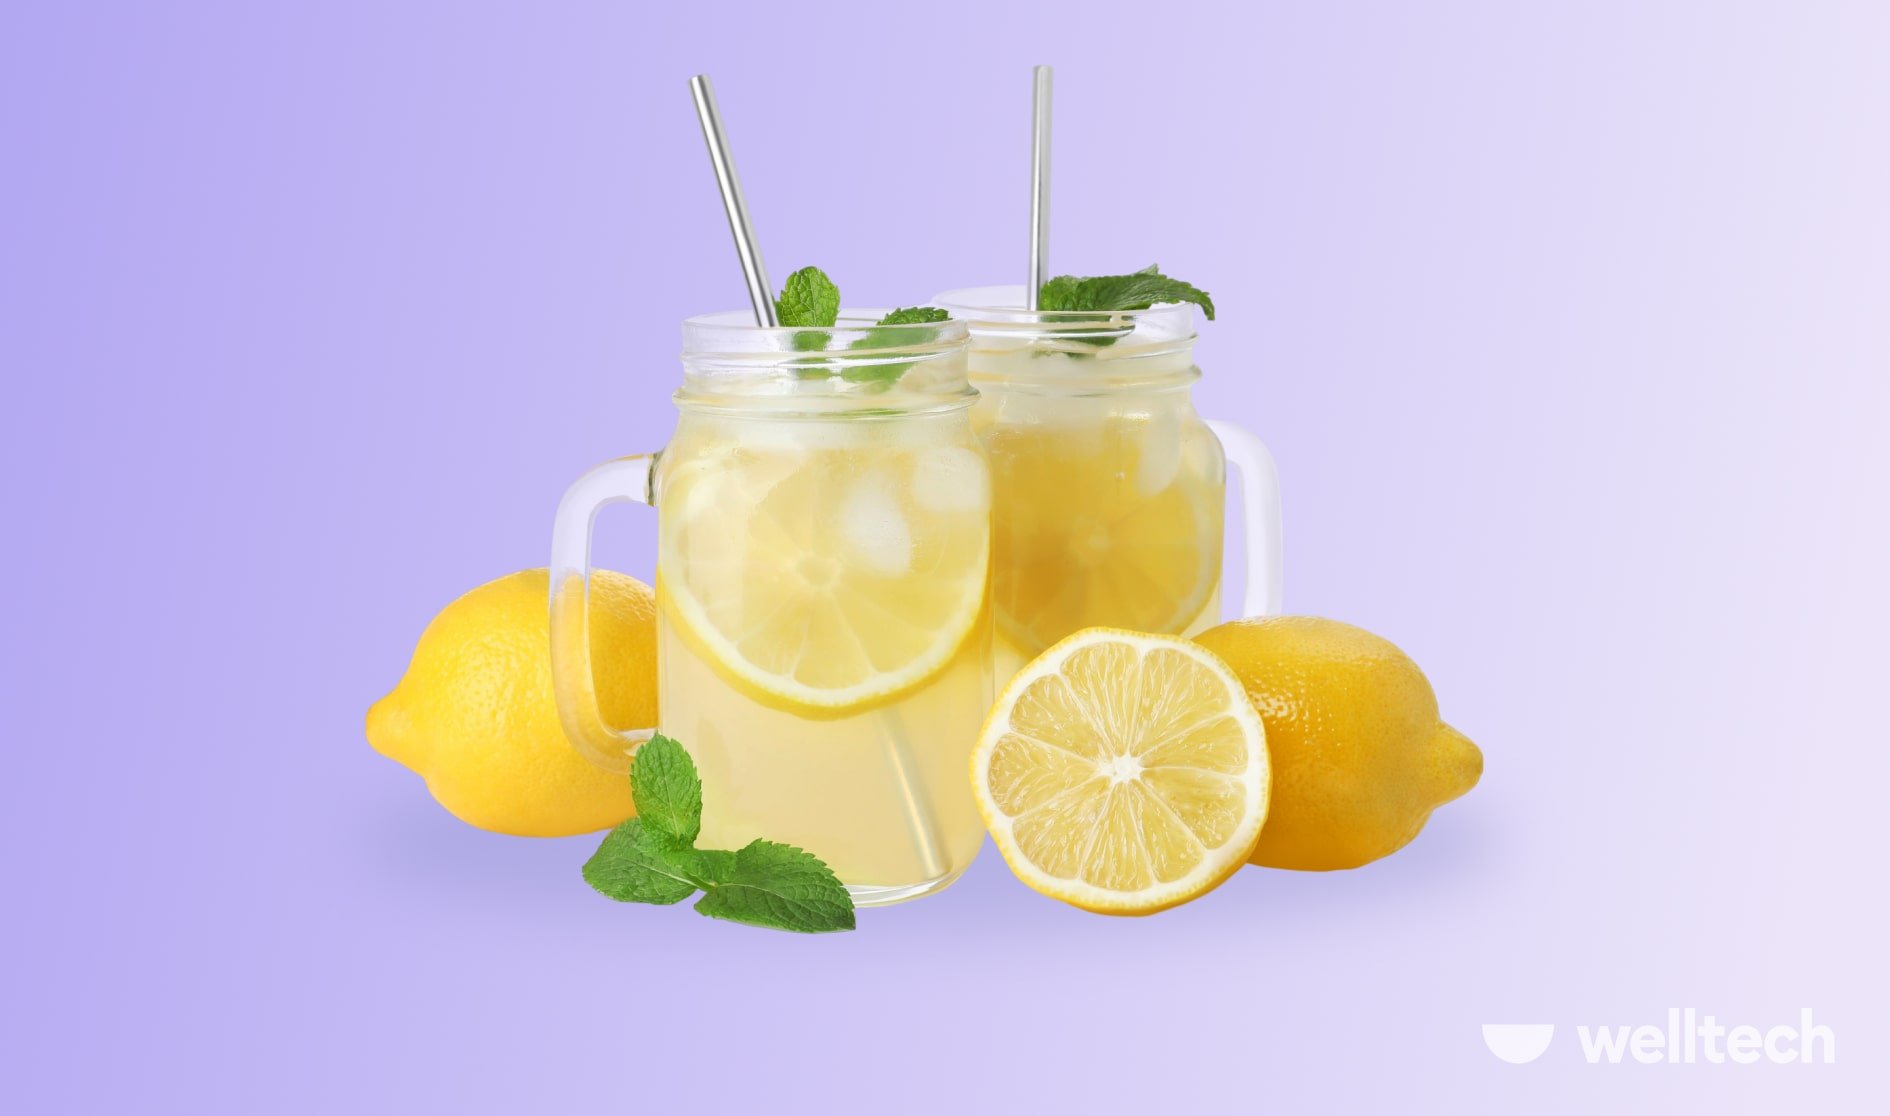 a couple of jars with lemon water and fresh lemons it them, disadvantages of drinking lemon water daily